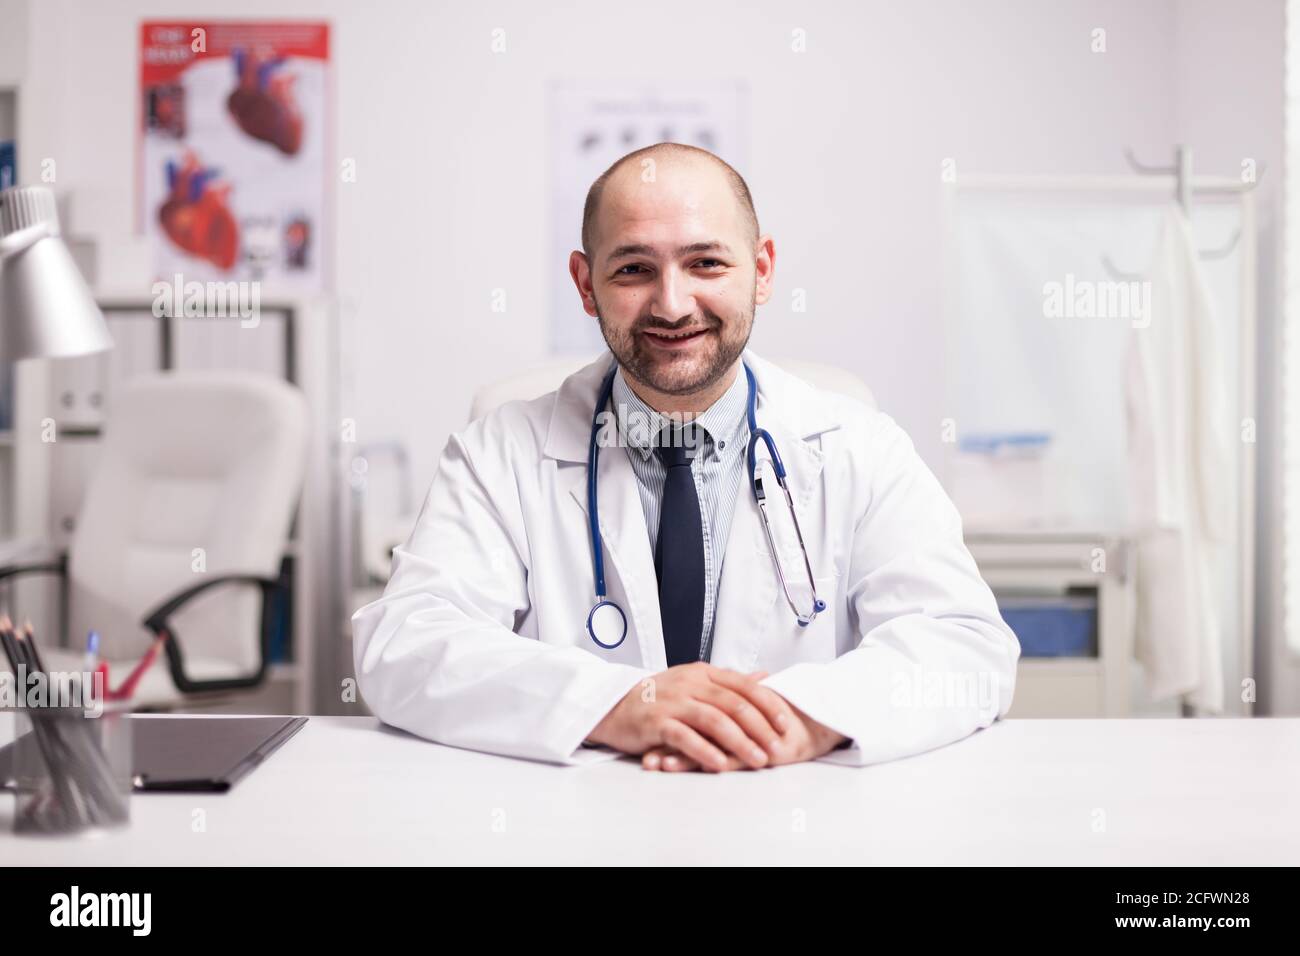 Portrait of young doctor smiling looking at the camera in hospital office wearing white coat and stethoscope. Stock Photo